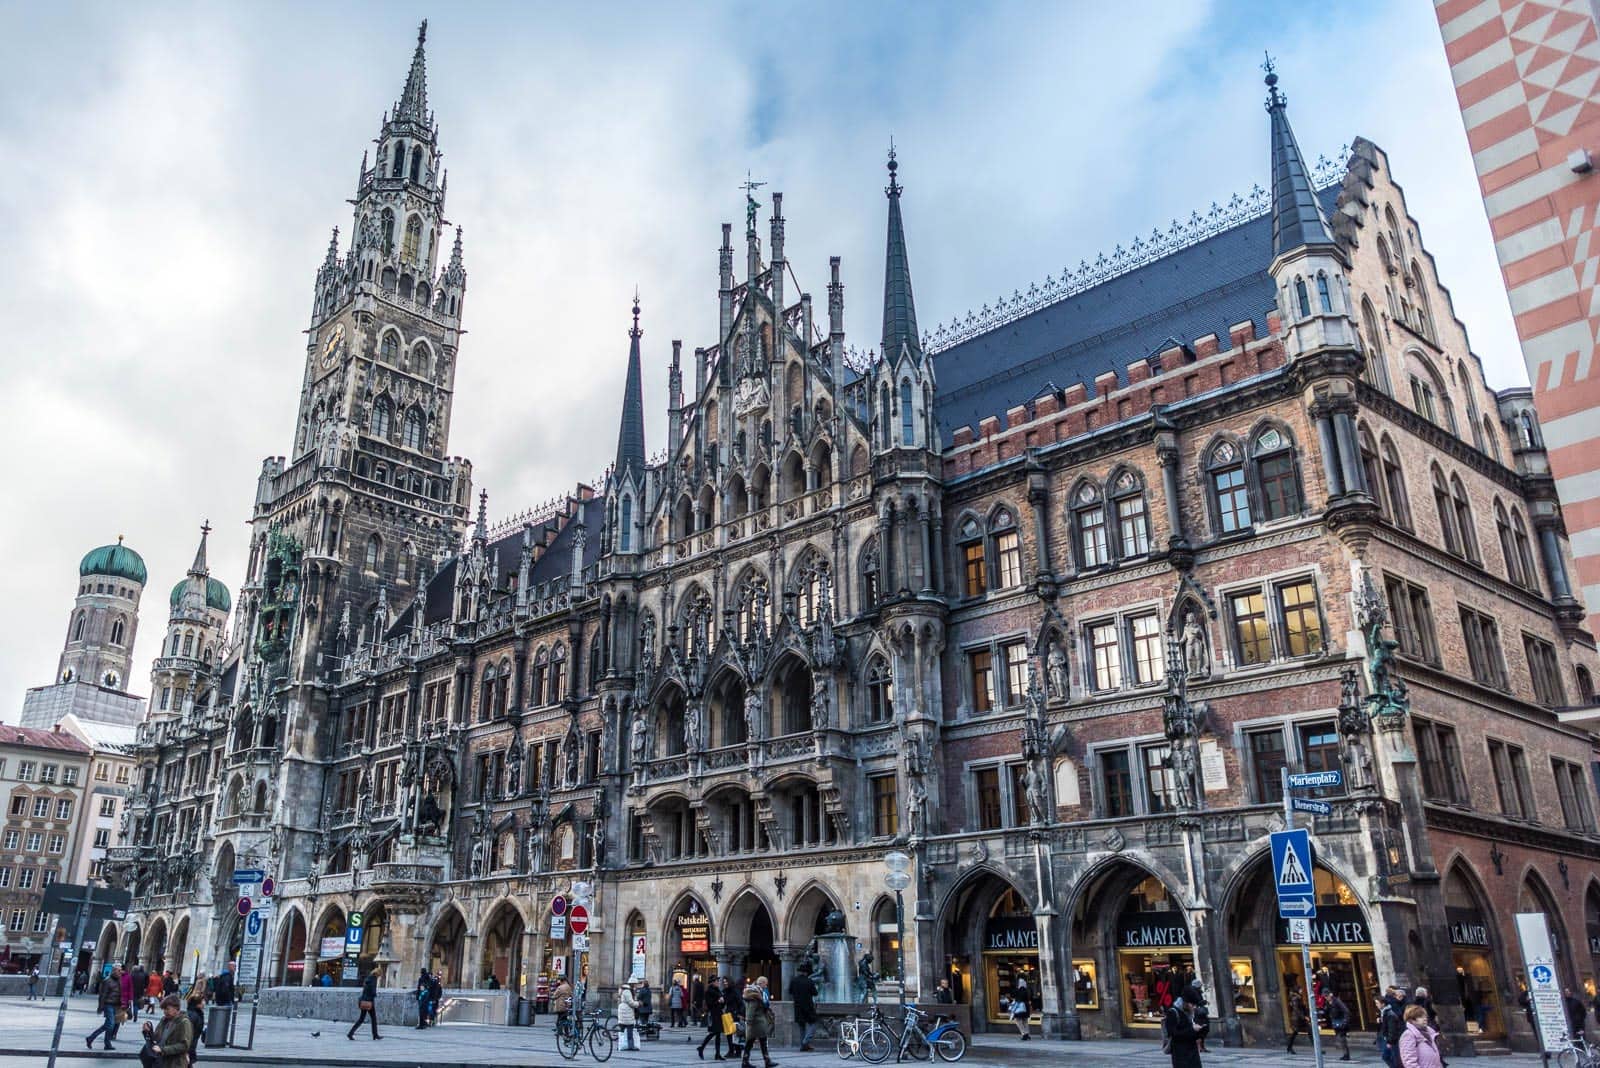 An ornate building in the city of munich.